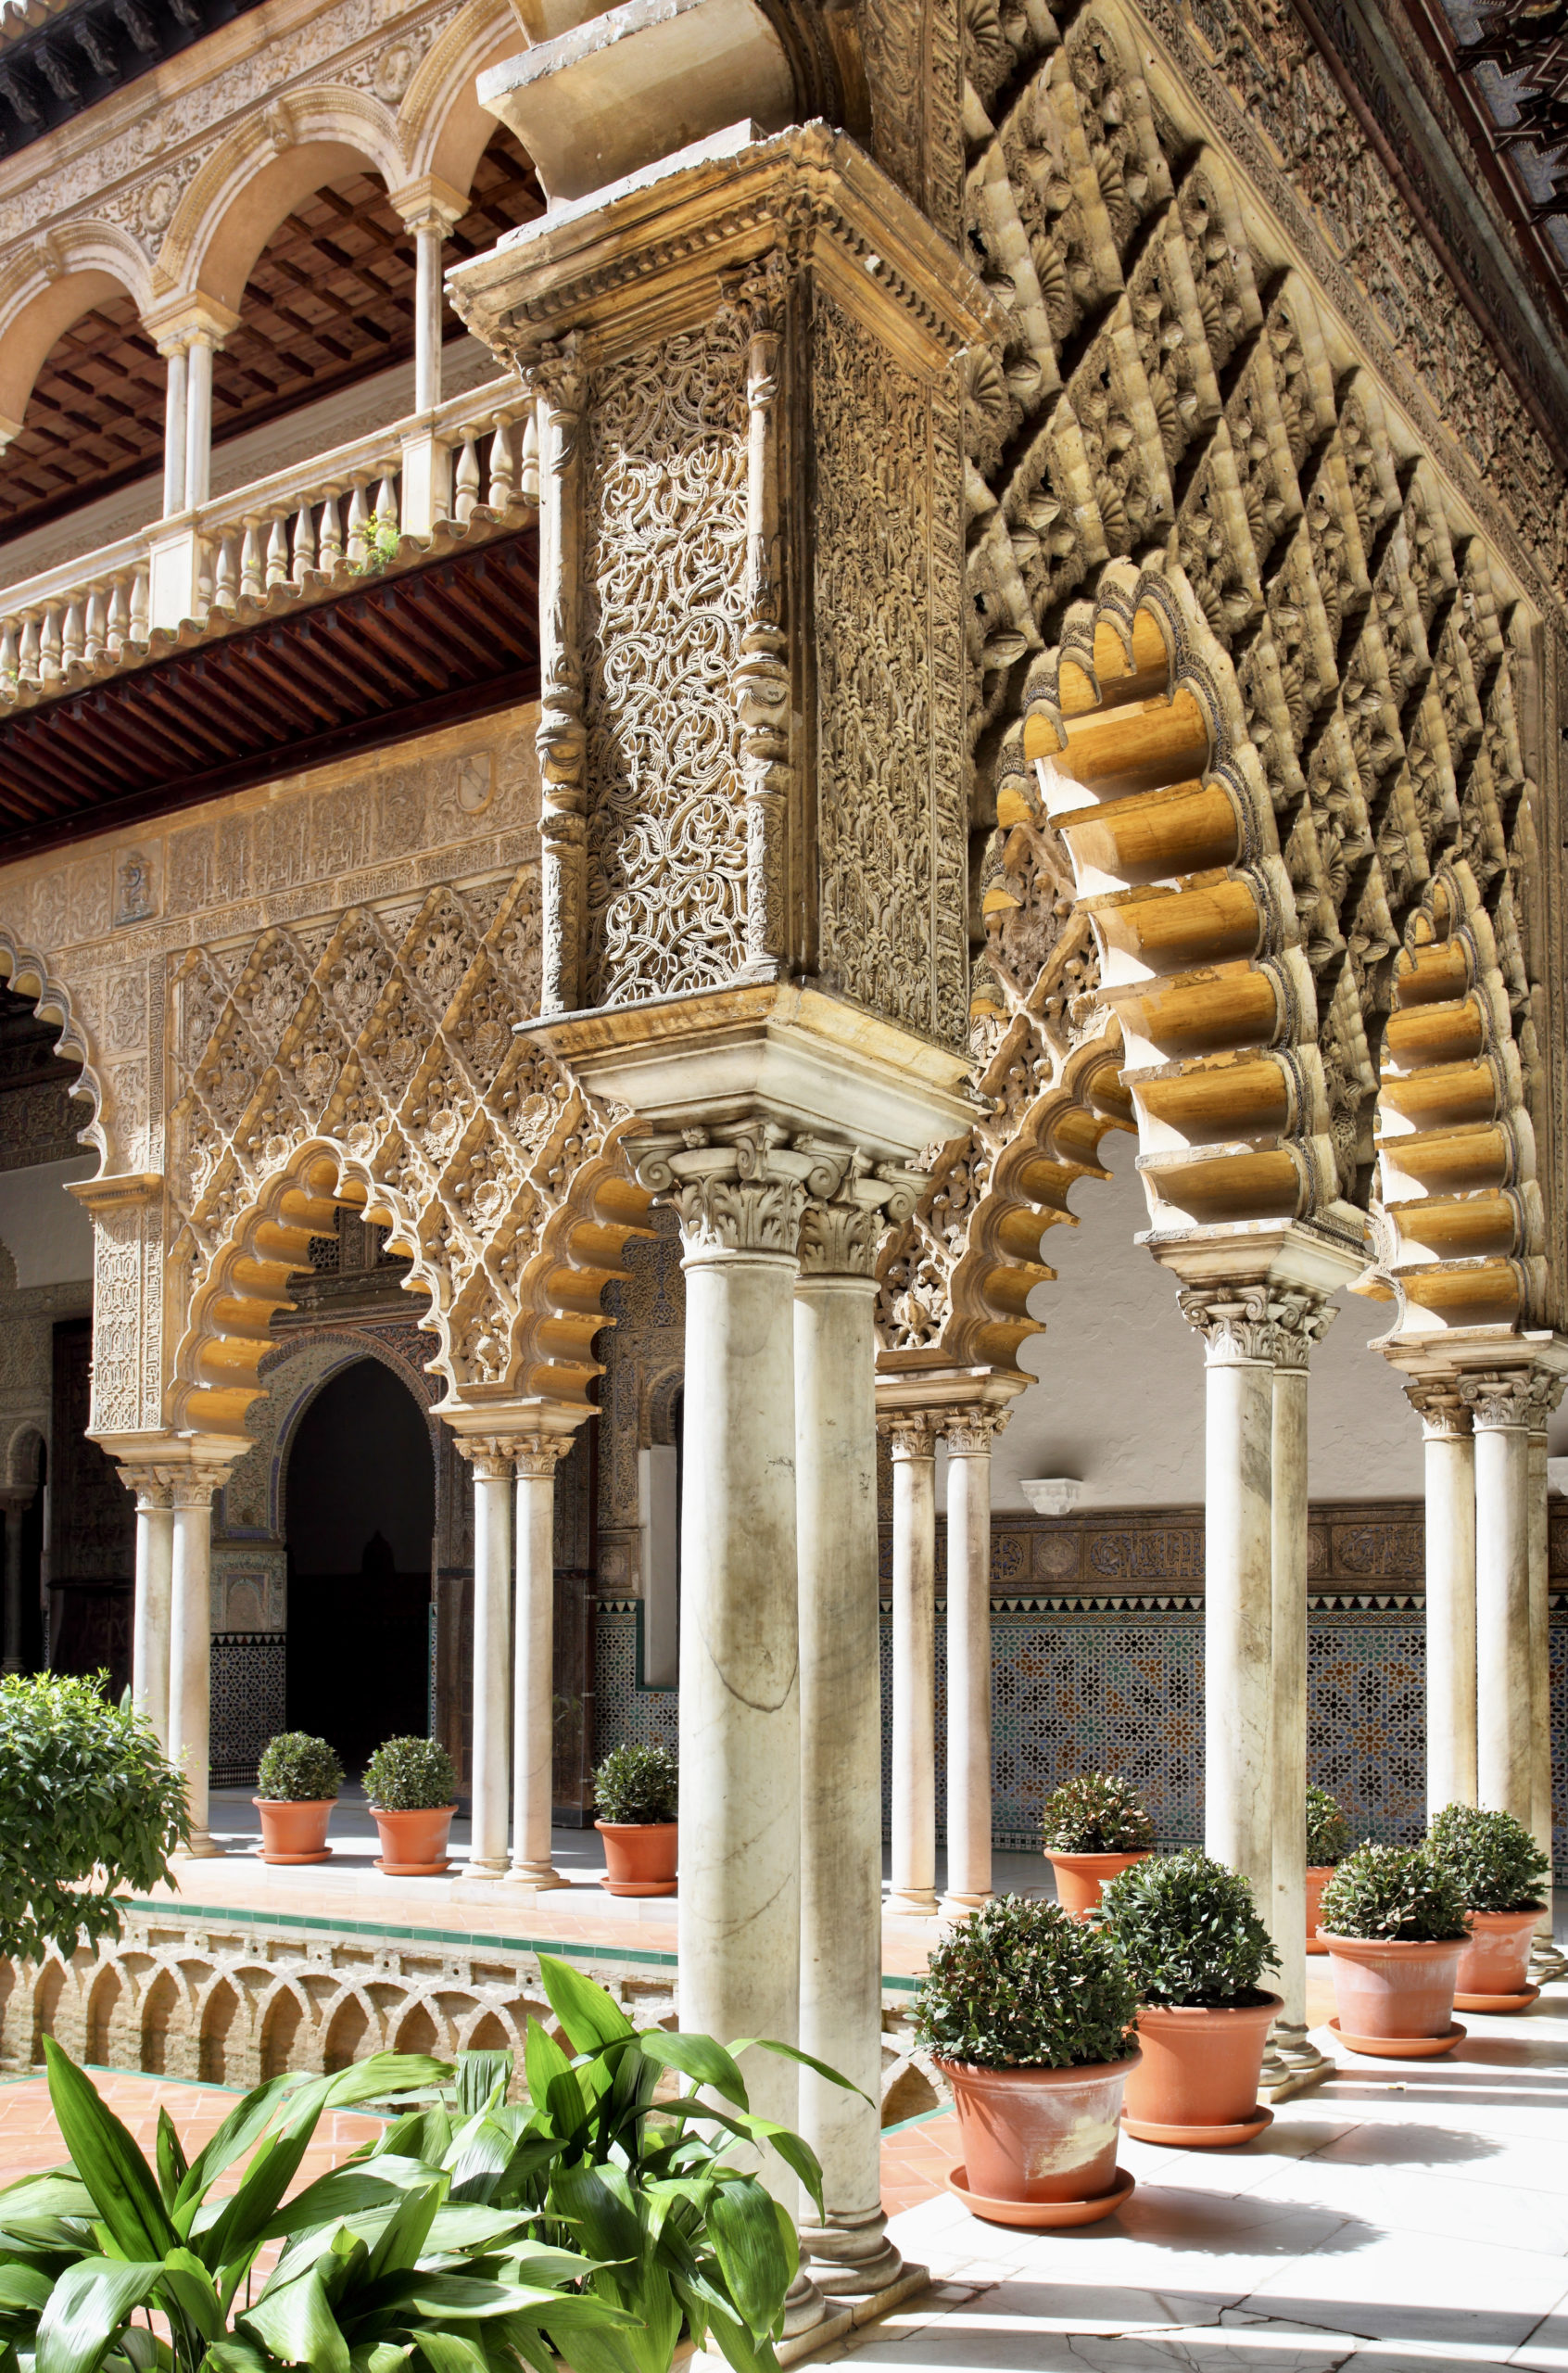 Courtyard of the Maidens in the Royal Alcazar